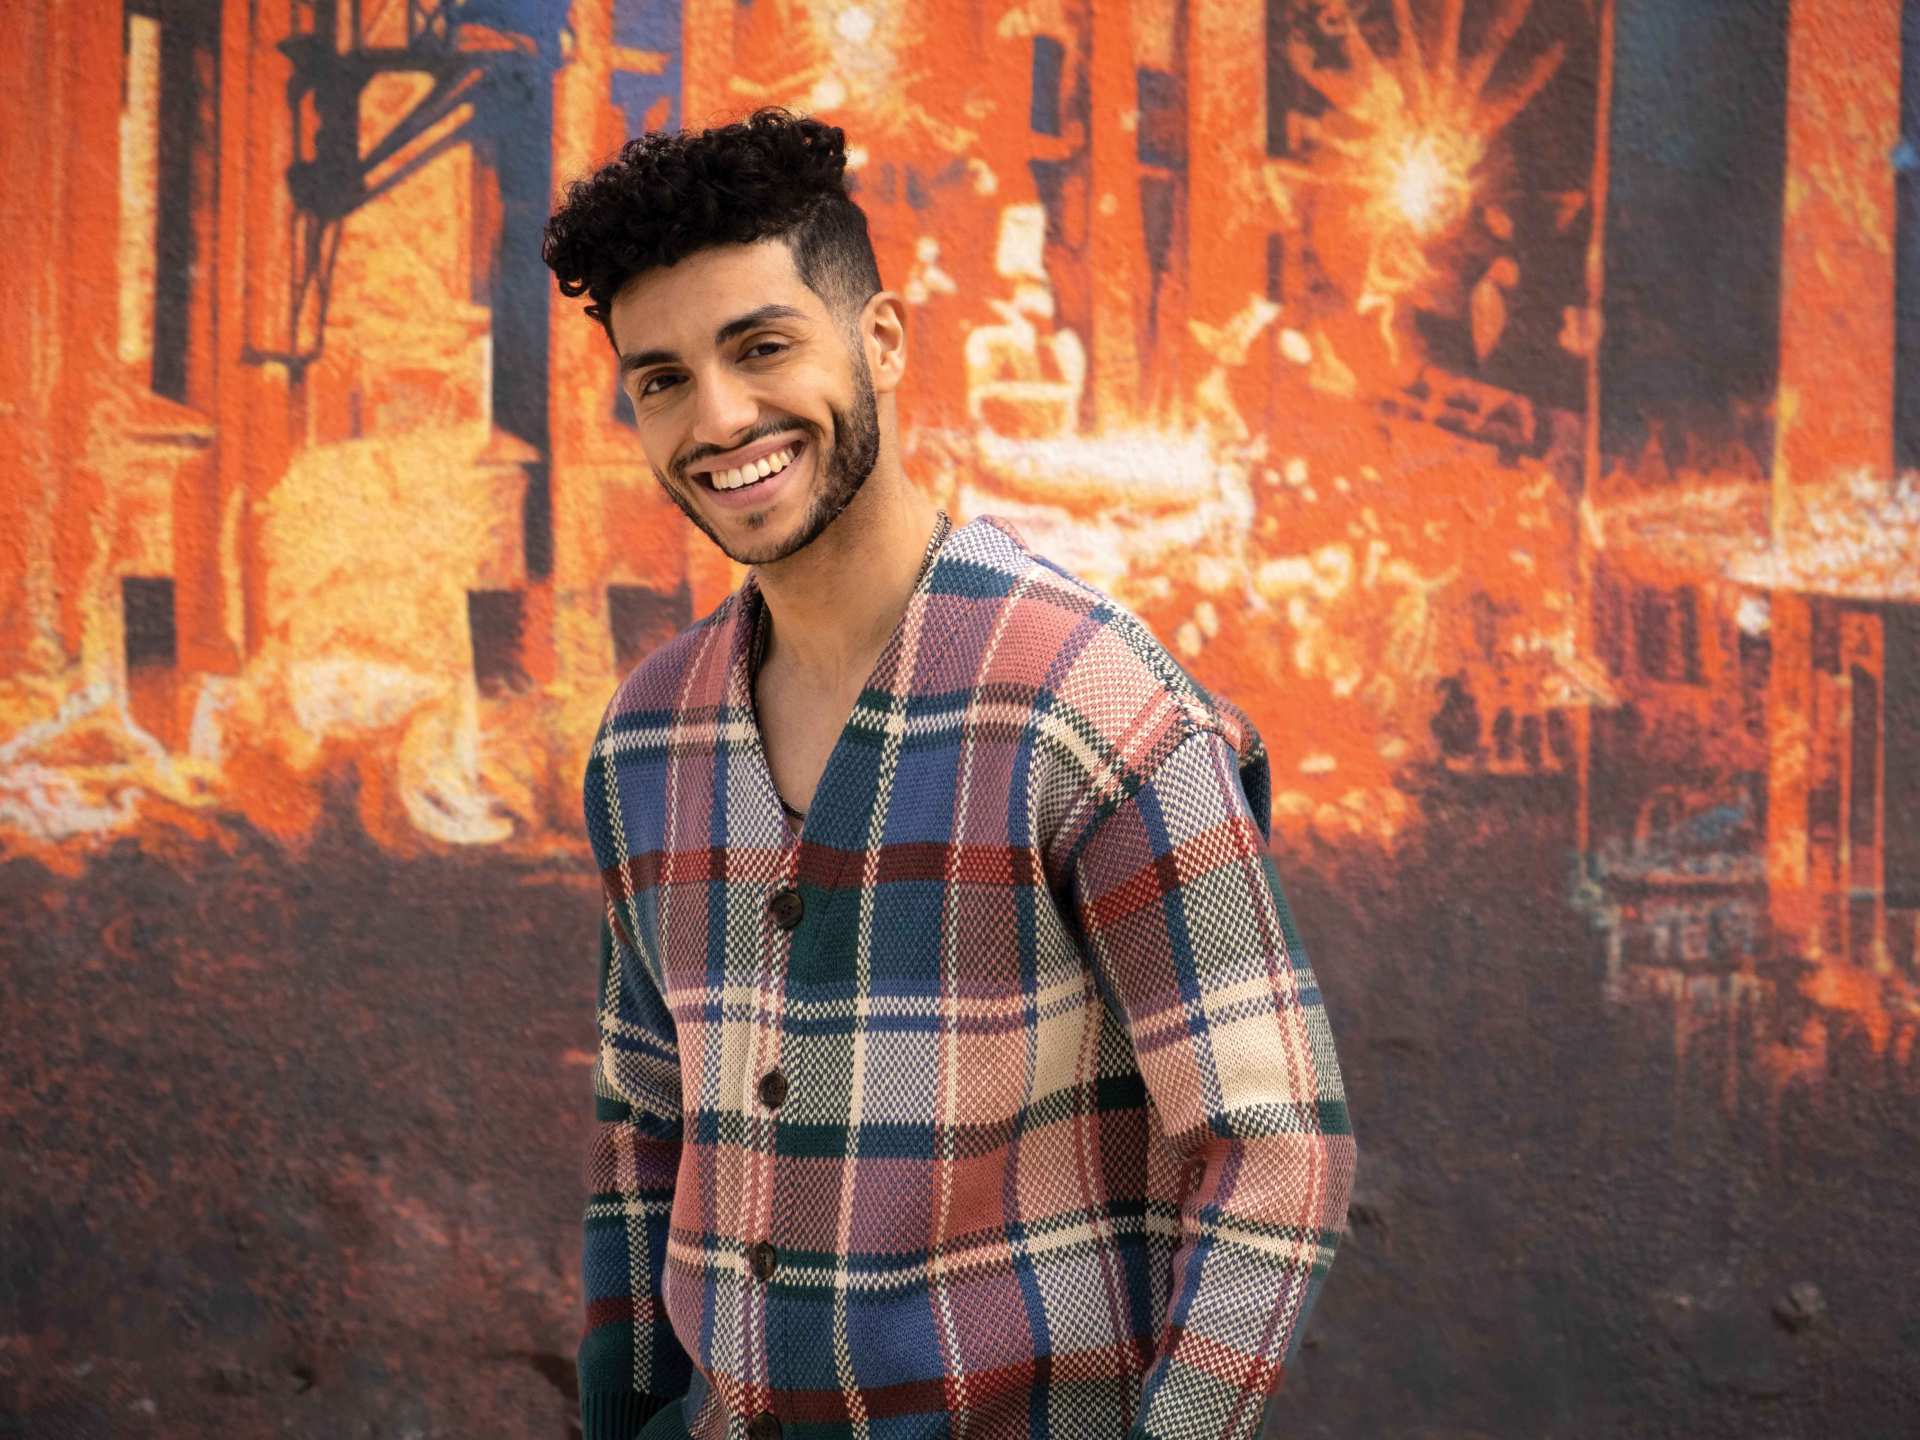 Vegan food in Toronto | Mena Massoud smiling in front of a colourful wall